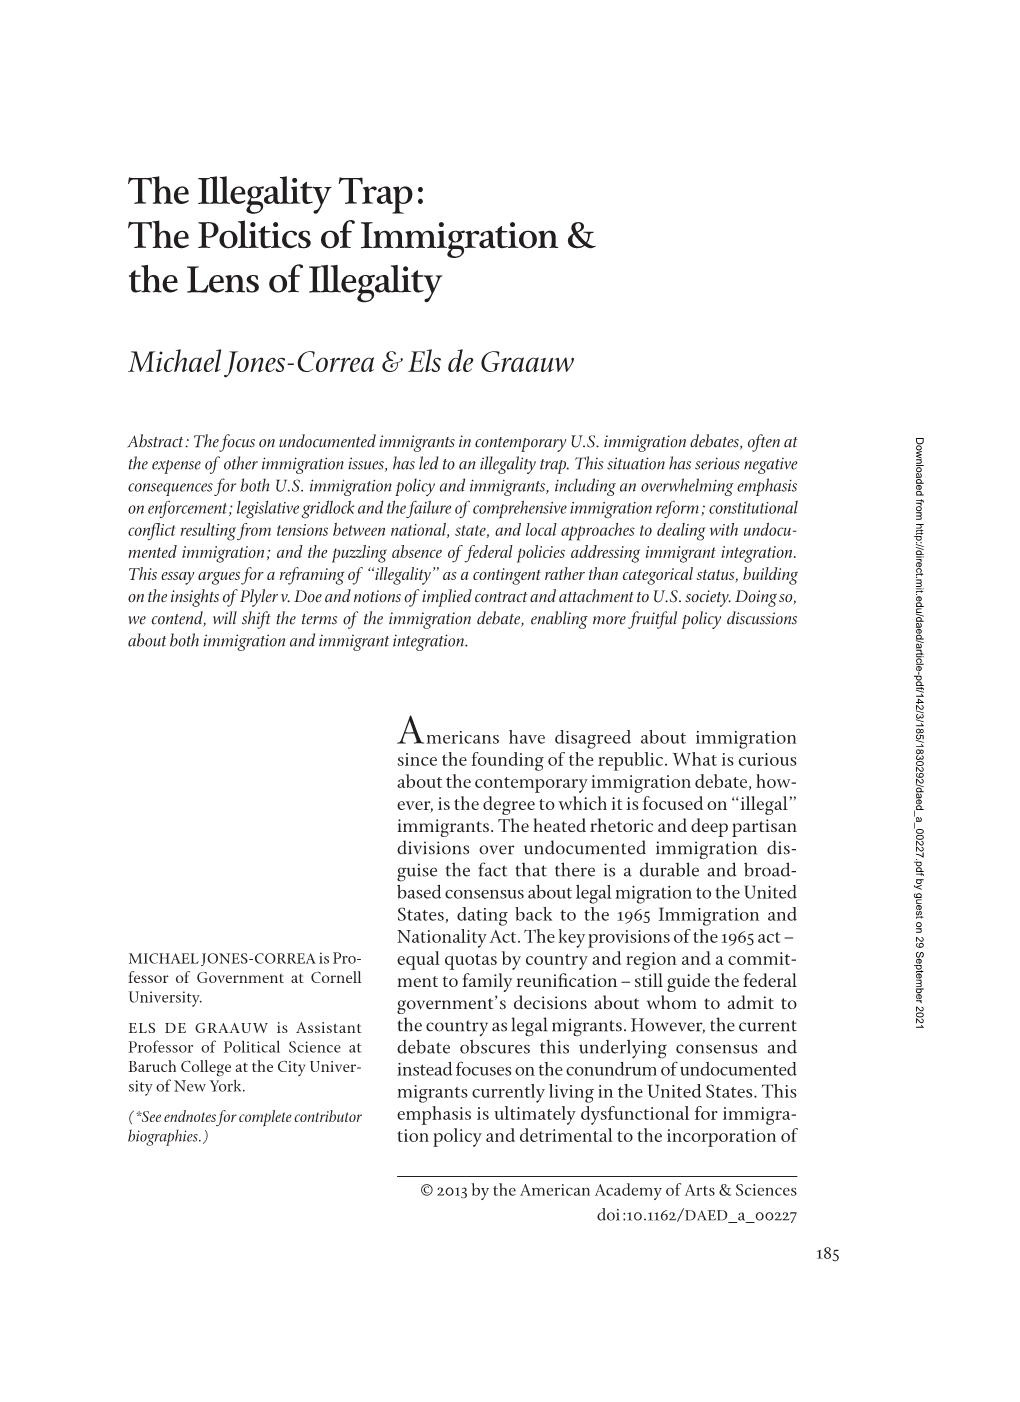 The Illegality Trap: the Politics of Immigration & the Lens of Illegality